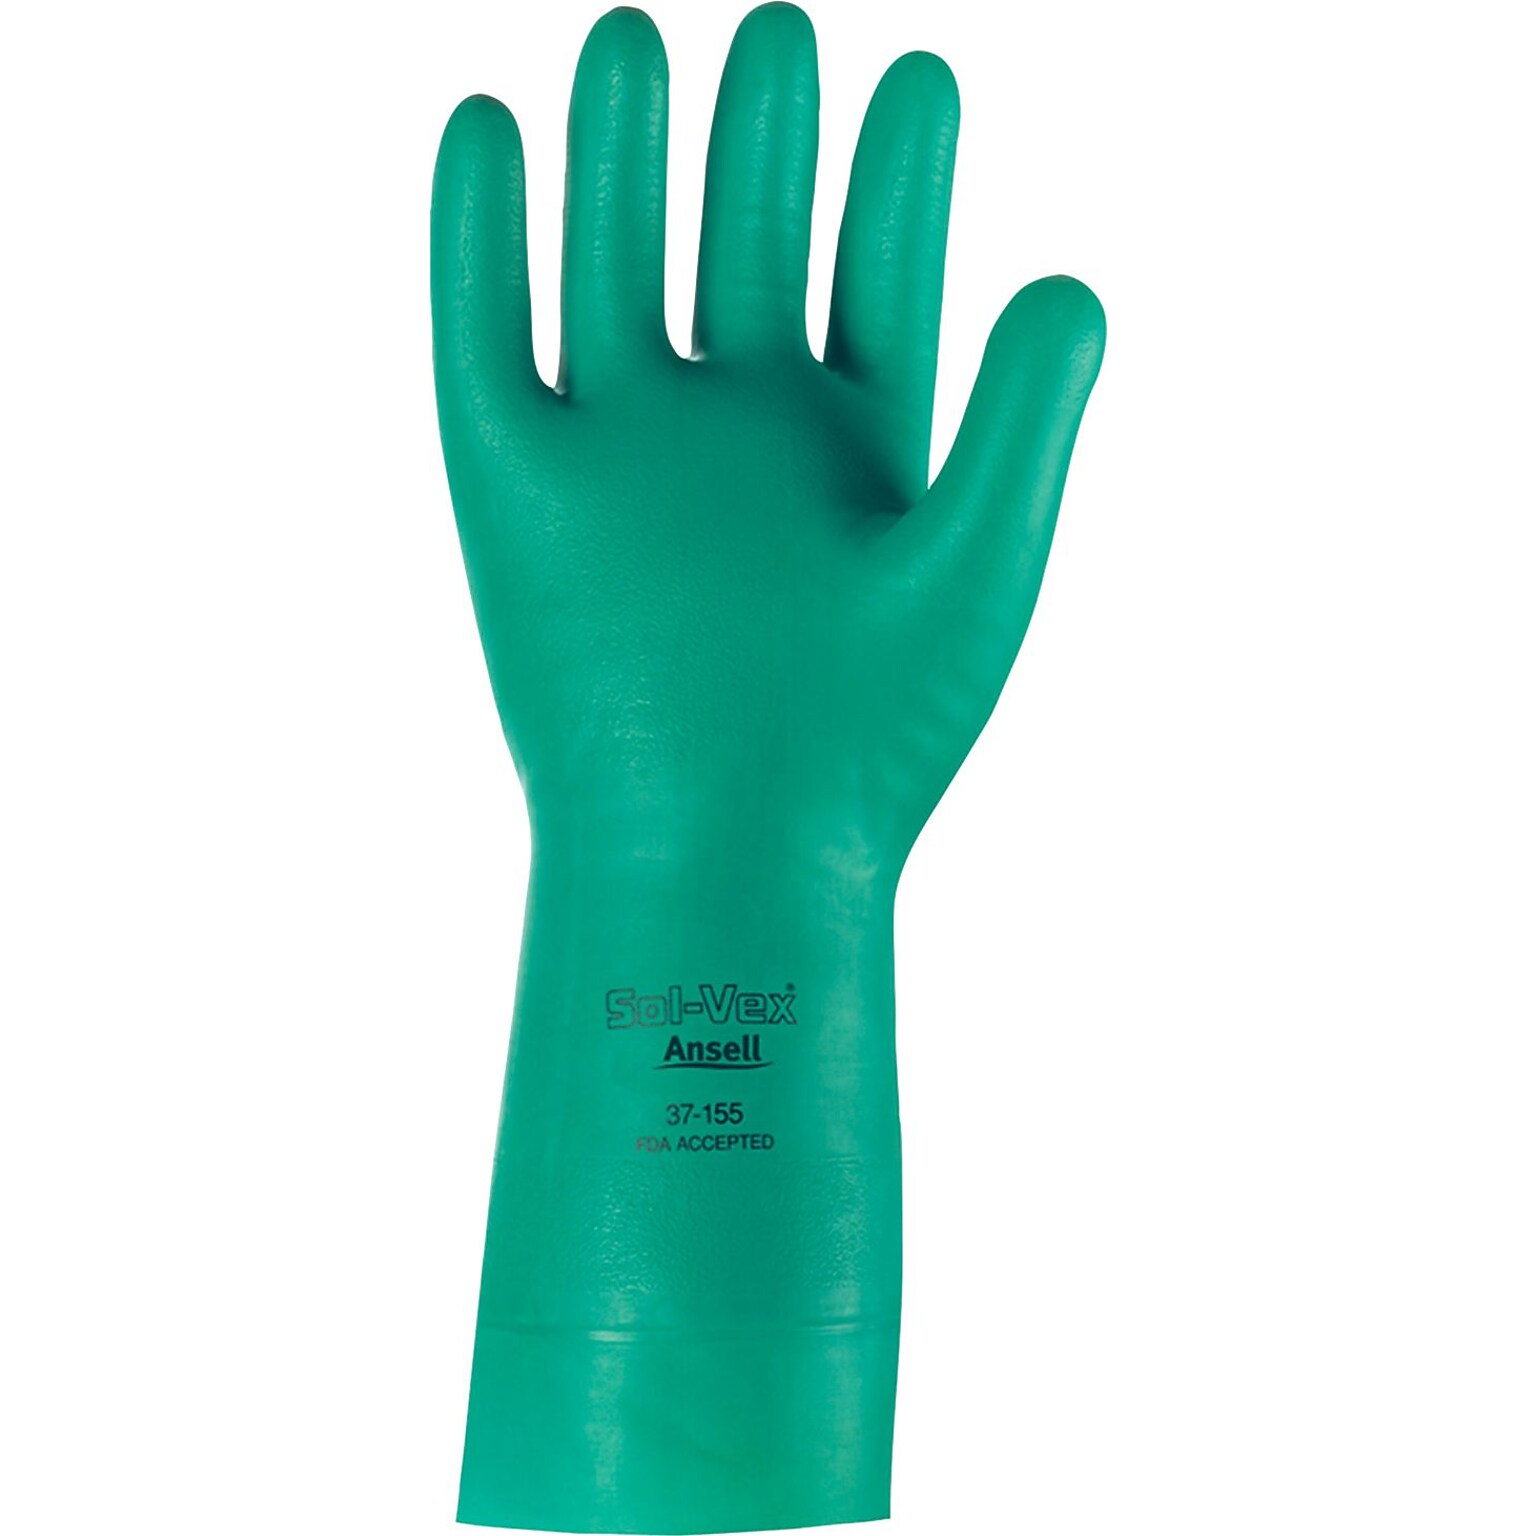 Ansell Sol-Vex Unsupported Nitrile Heavy-Duty Work Gloves, Straight Cuff, Green, Size 10, 13L, 12 Pairs/Box (37-145-9)